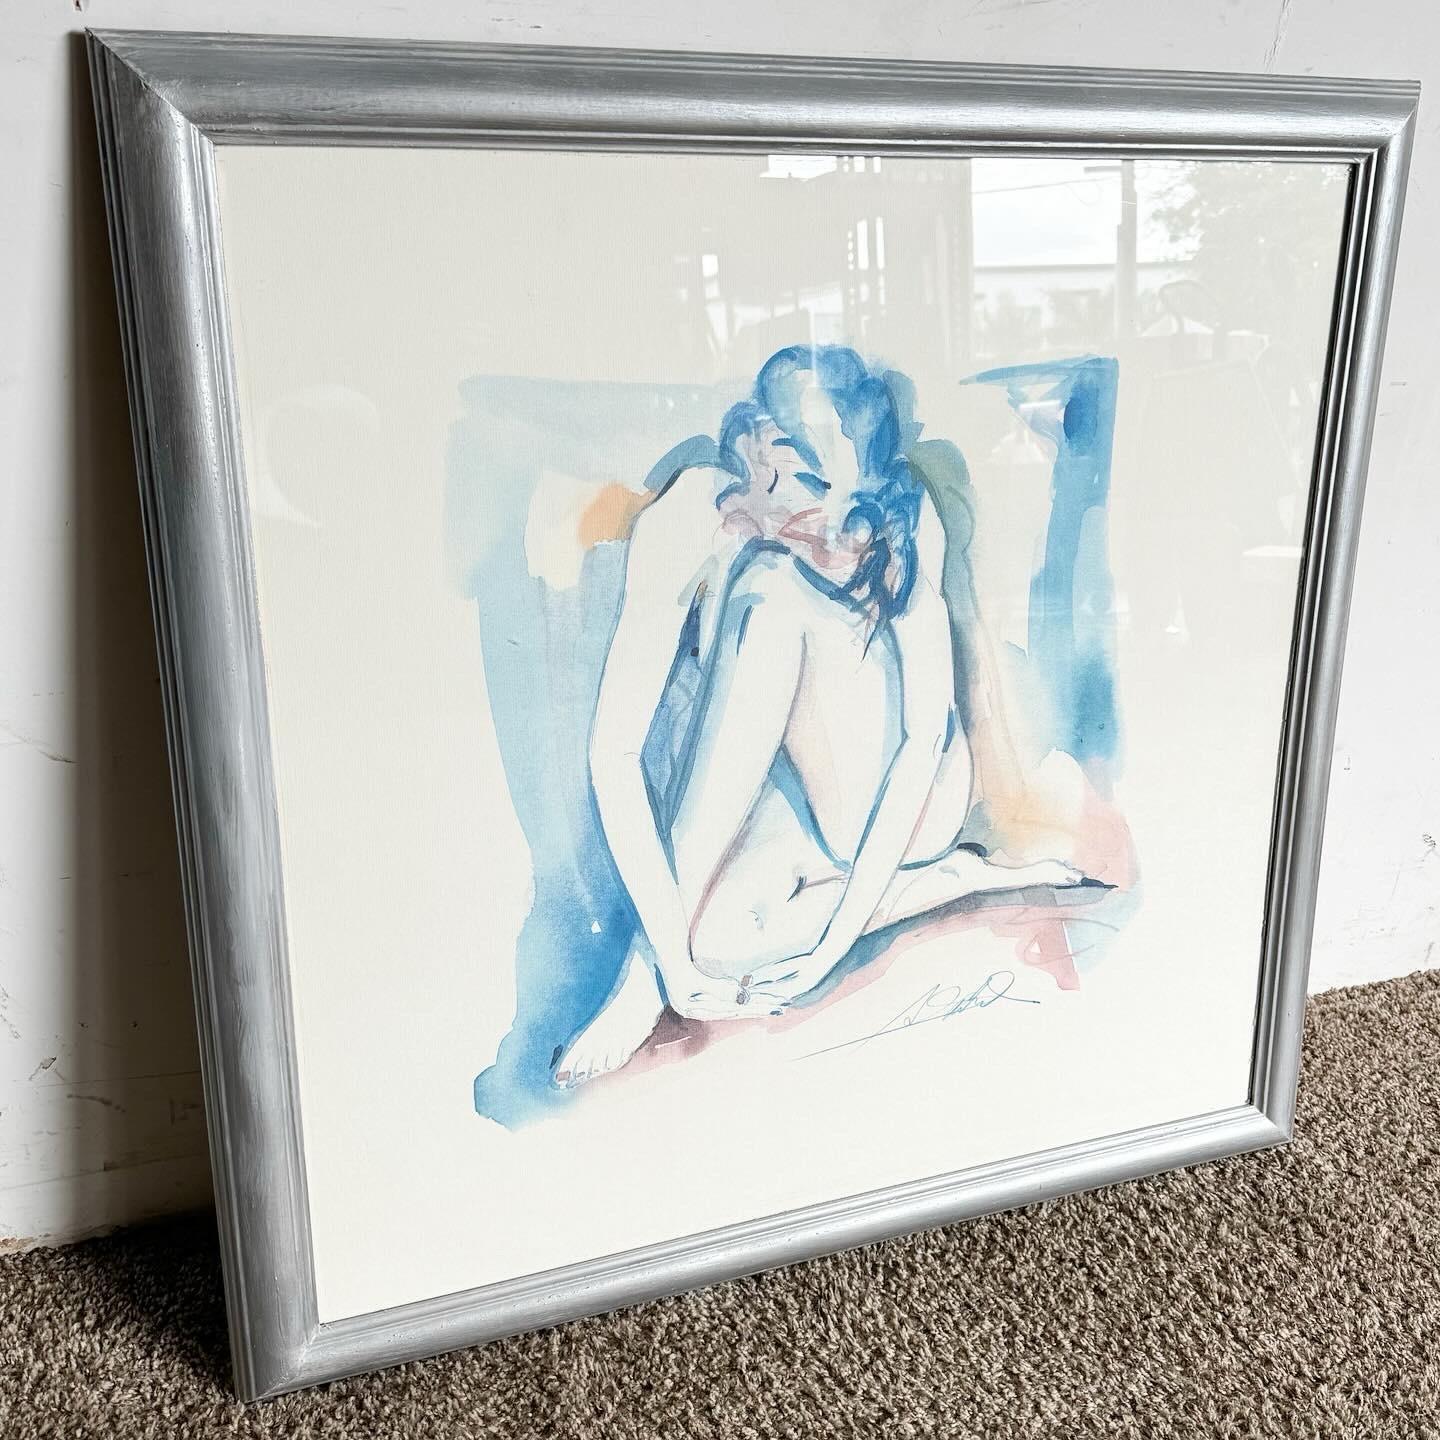 Experience the elegance of the Vintage Signed and Framed Watercolor Painting of a Kneeling Lady. This artwork showcases delicate watercolor strokes, capturing the serenity of the subject. The artist's signature adds authenticity, making it a